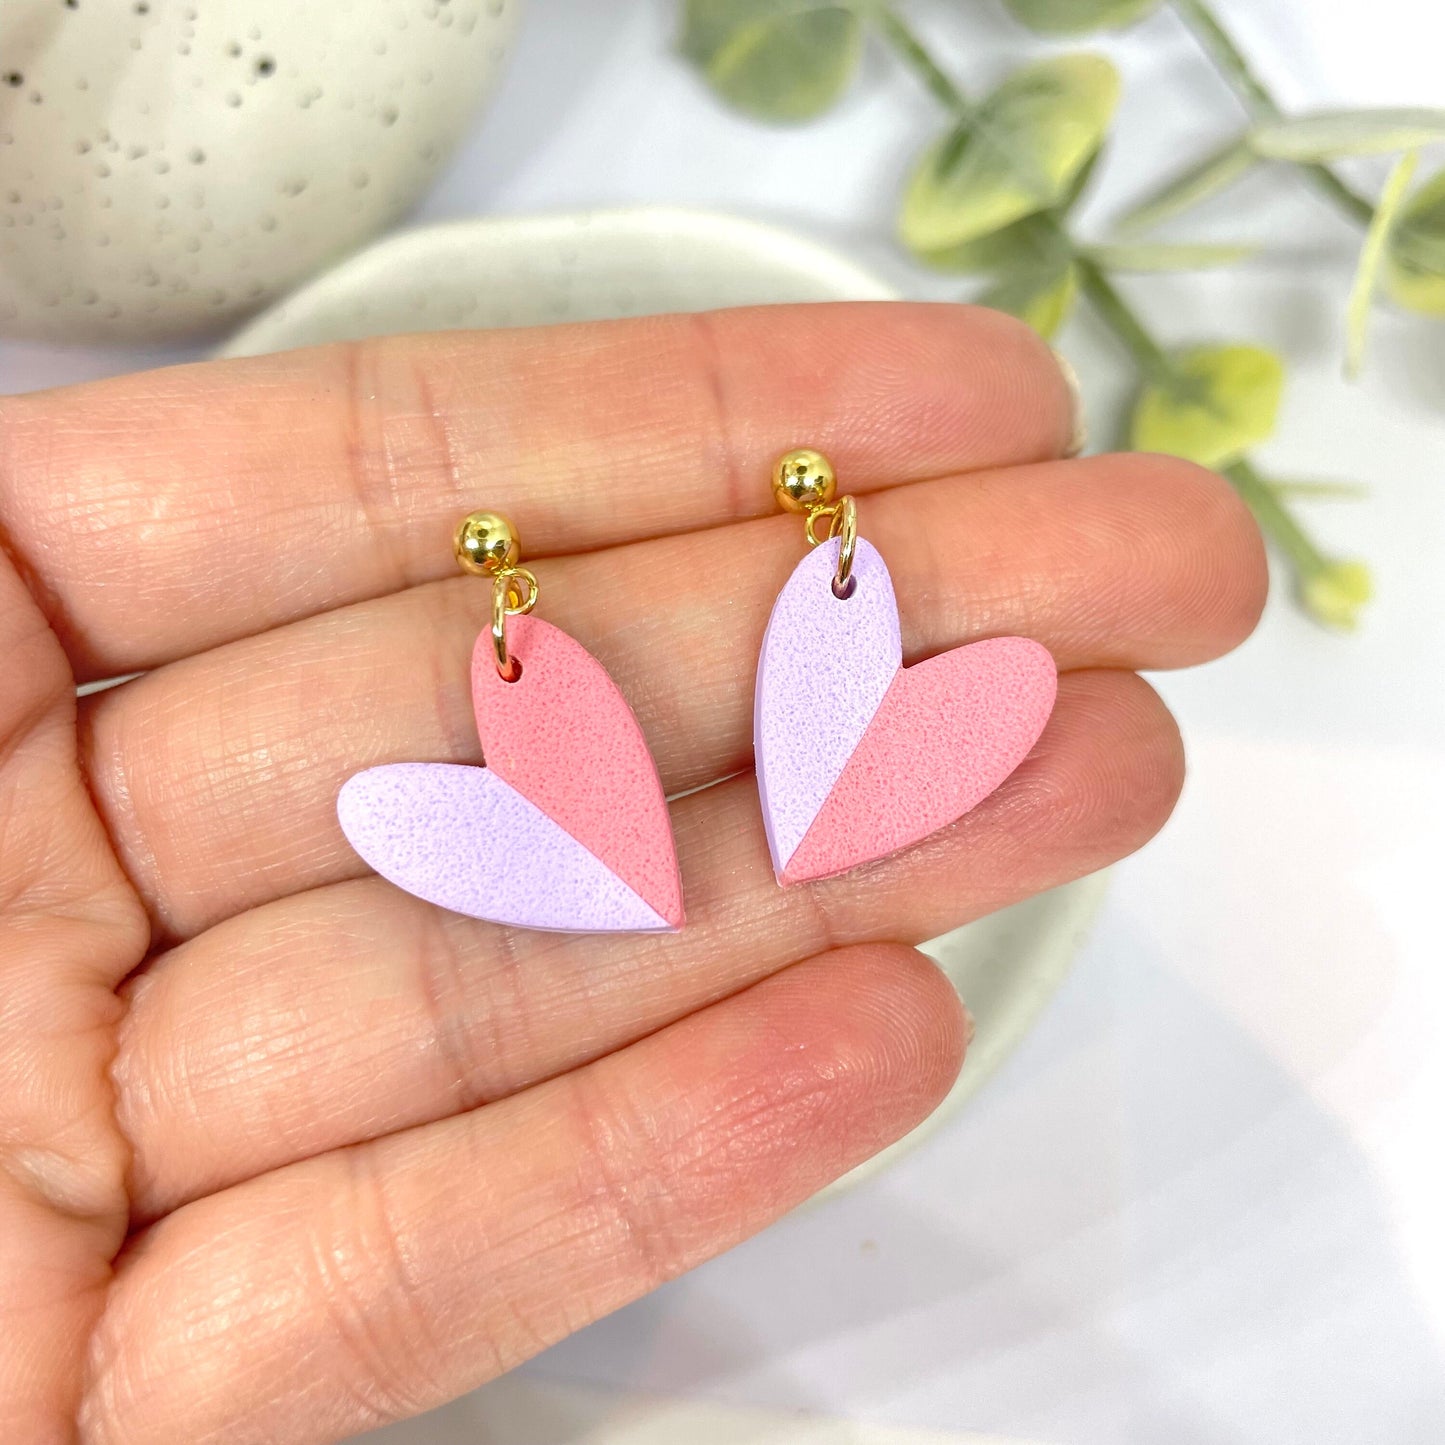 Heart dangle earrings, pink and lilac two tone earrings, Galentine’s gift for her, girlfriend gift, wife gift, Valentine’s jewellery,